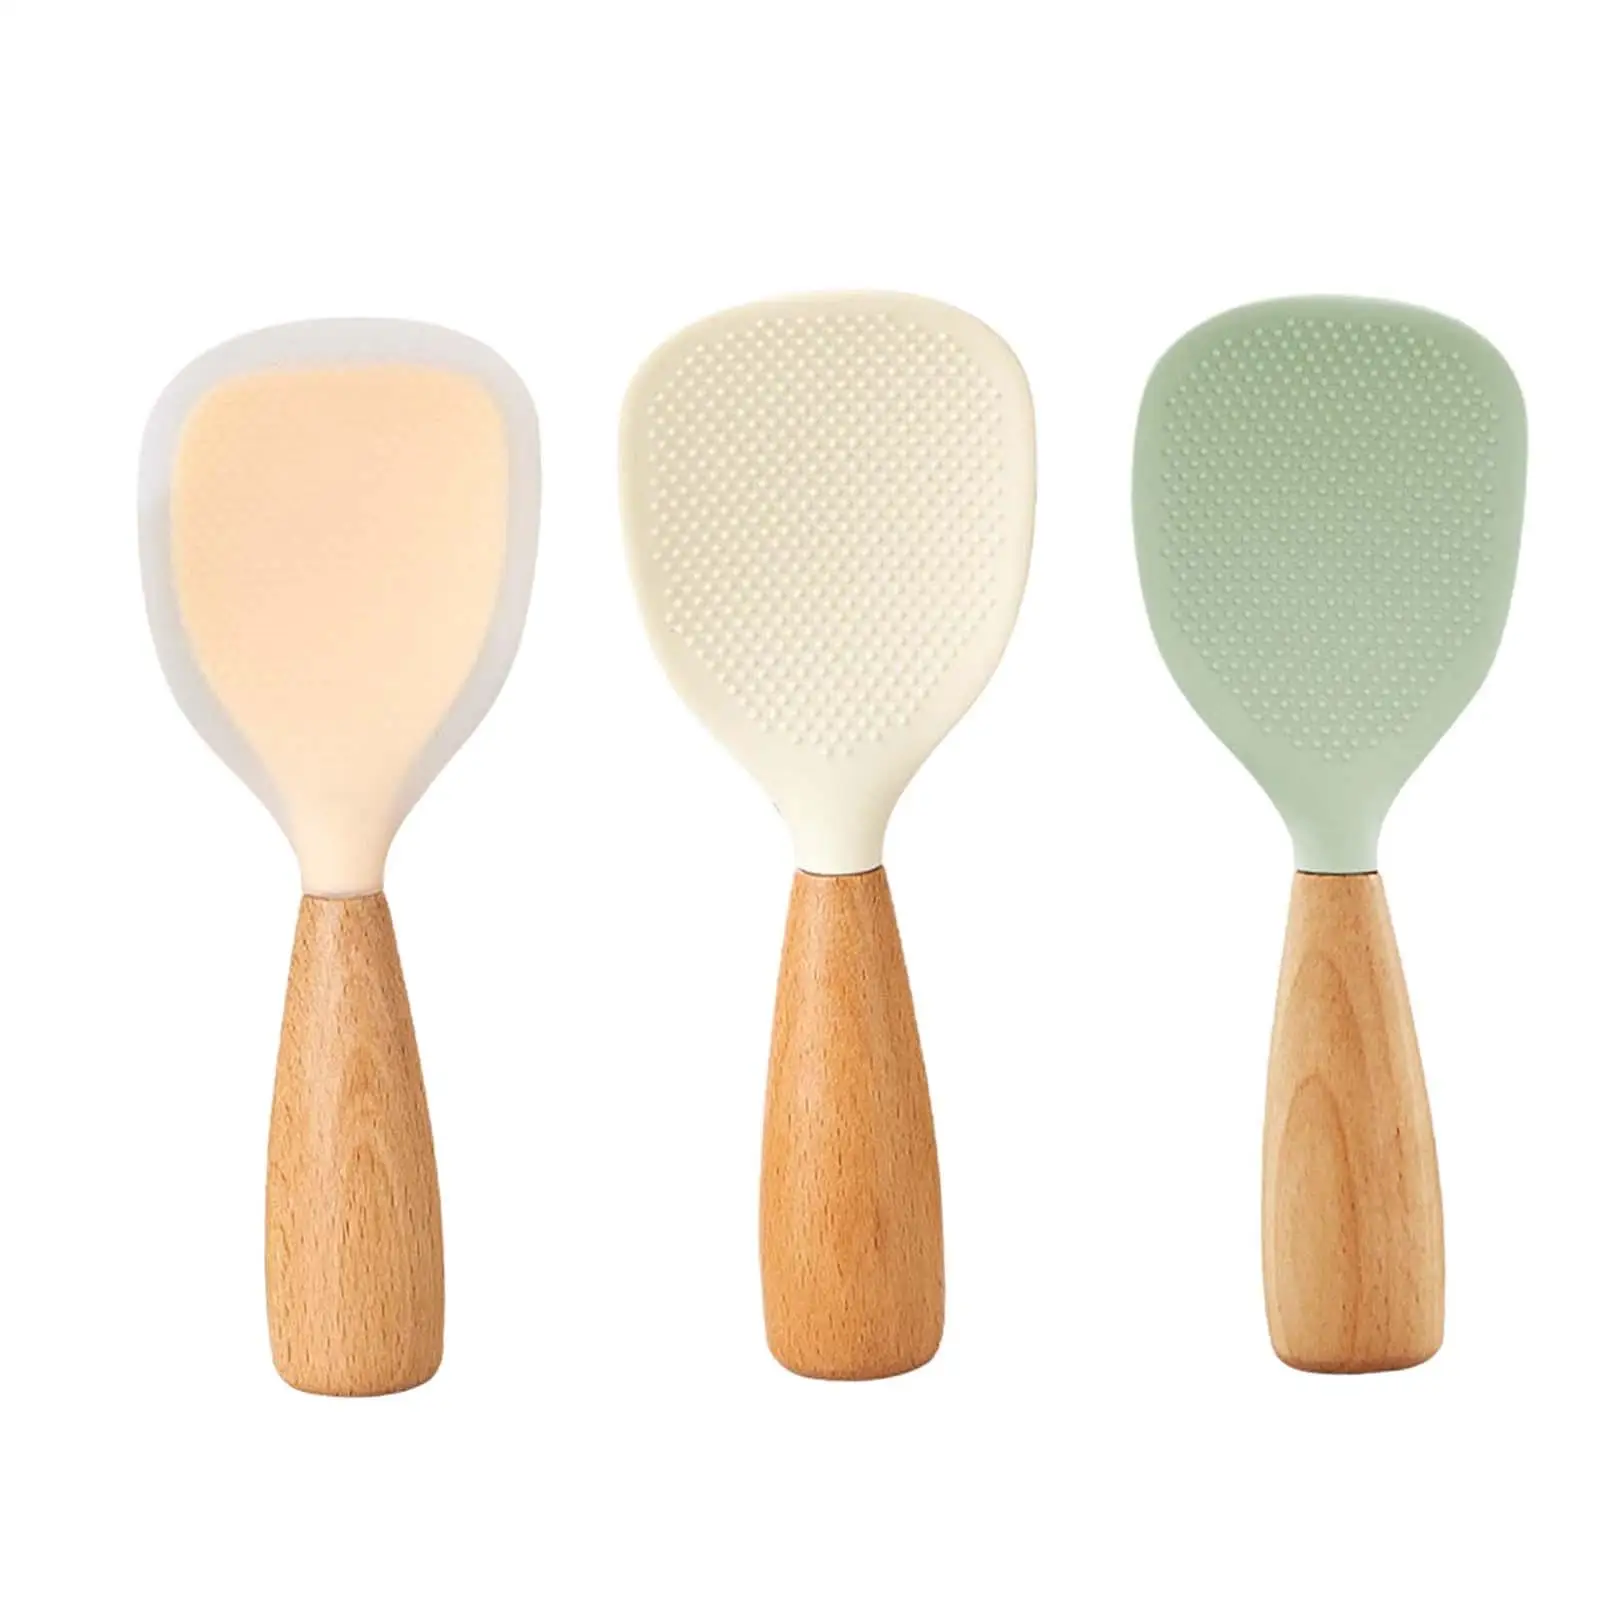 Silicone Rice Spoon Household with Wood Handle Heat Resistant Rice Scooper for Home Mashed Potato Restaurant Kitchen Gadgets